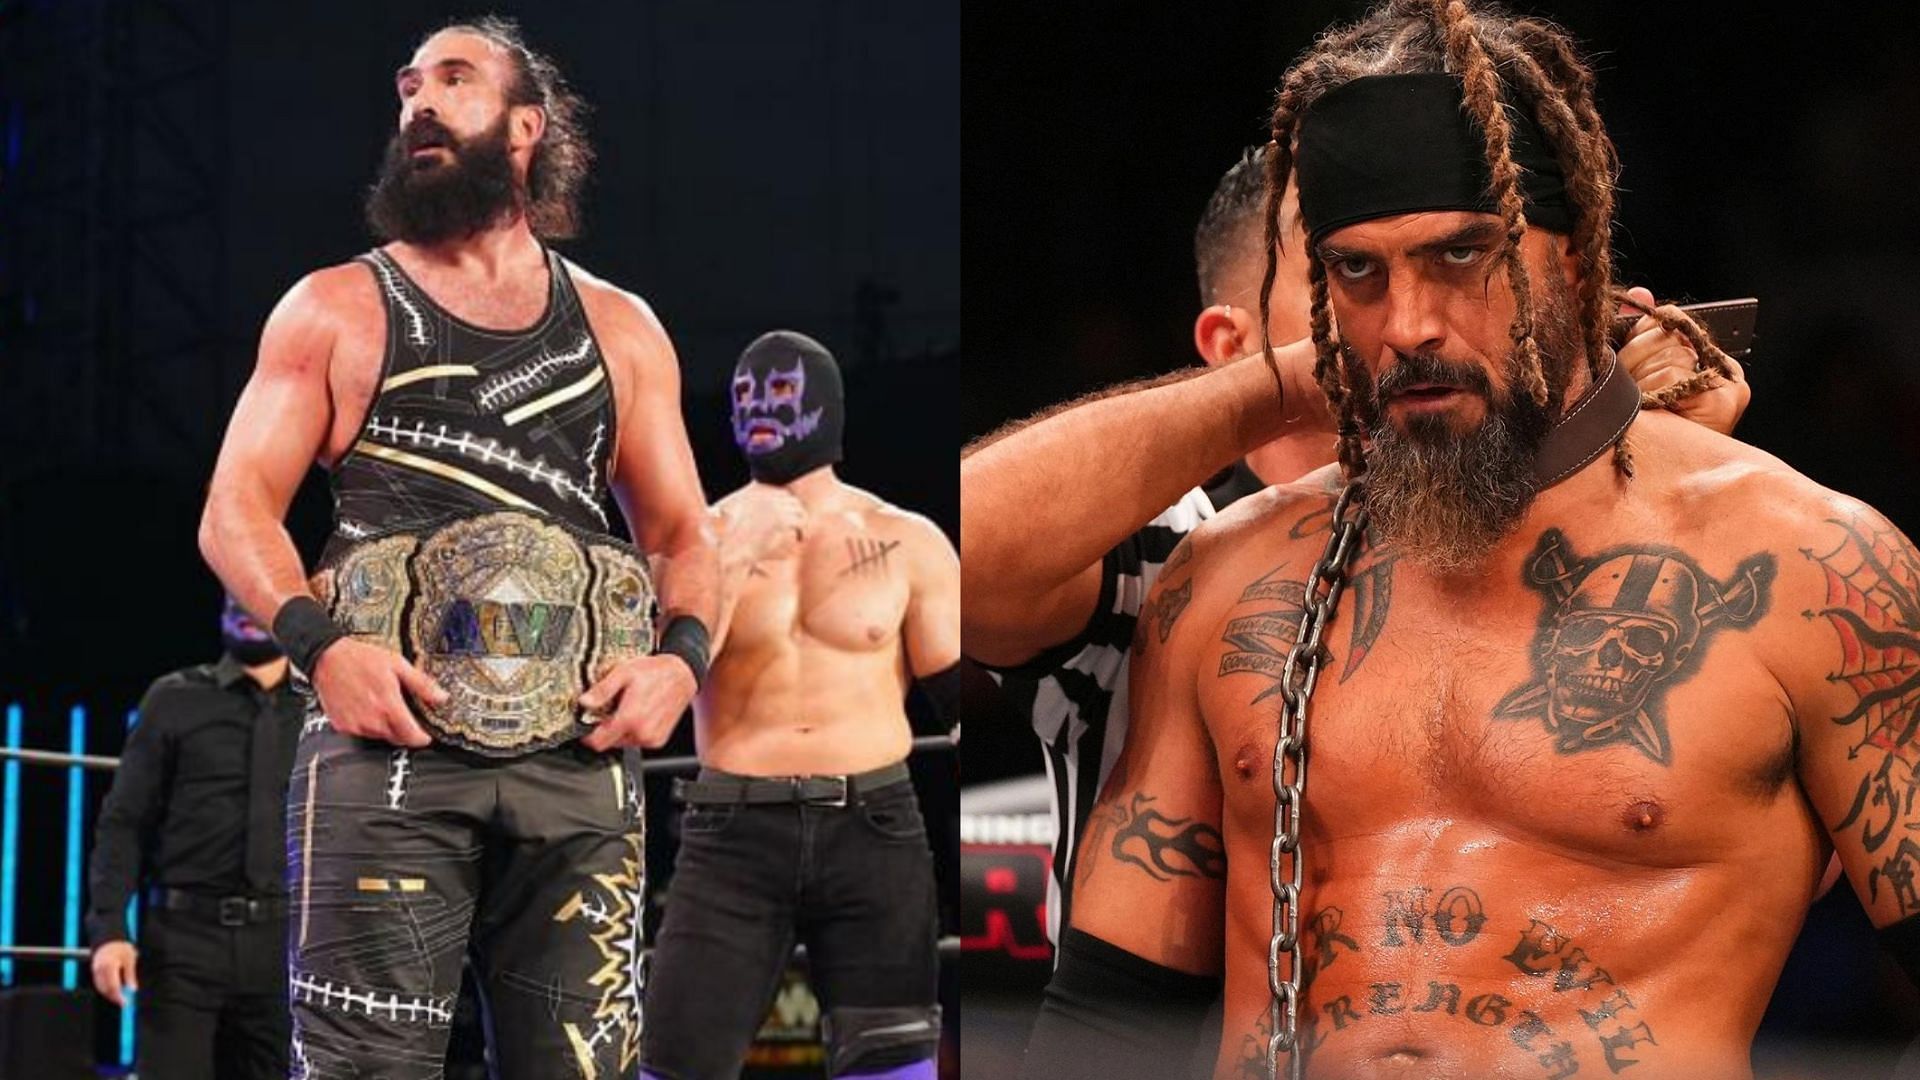 Brodie Lee (left) and Jay Briscoe (right)